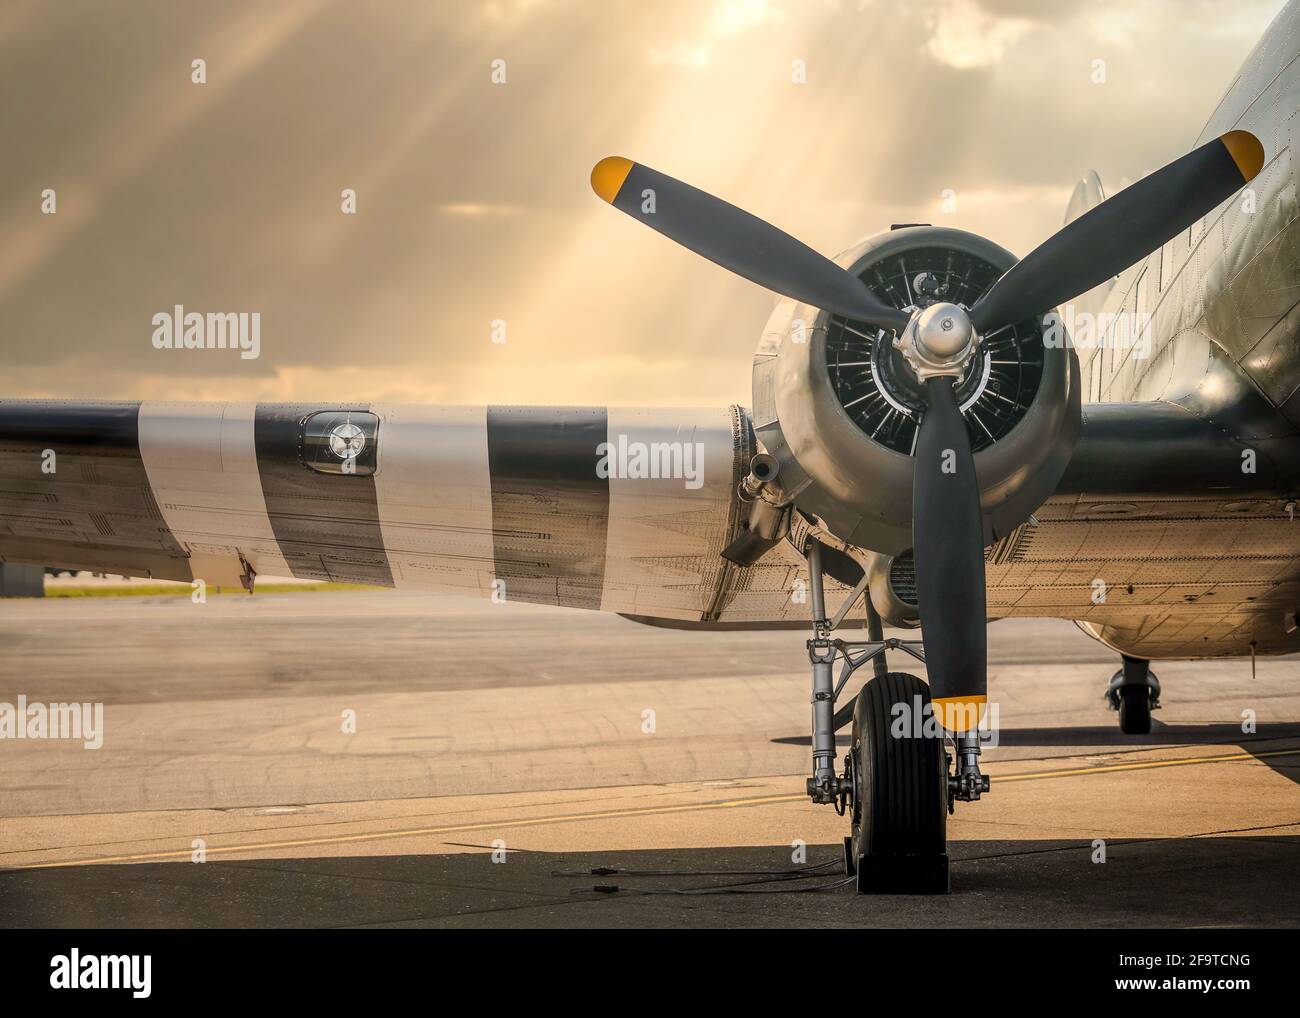 Old WW2 Dakota twin engine Operation Overlord aeroplane parked with sun setting over plane wings sunlight rays from sky. Wheel chocks three propellers Stock Photo